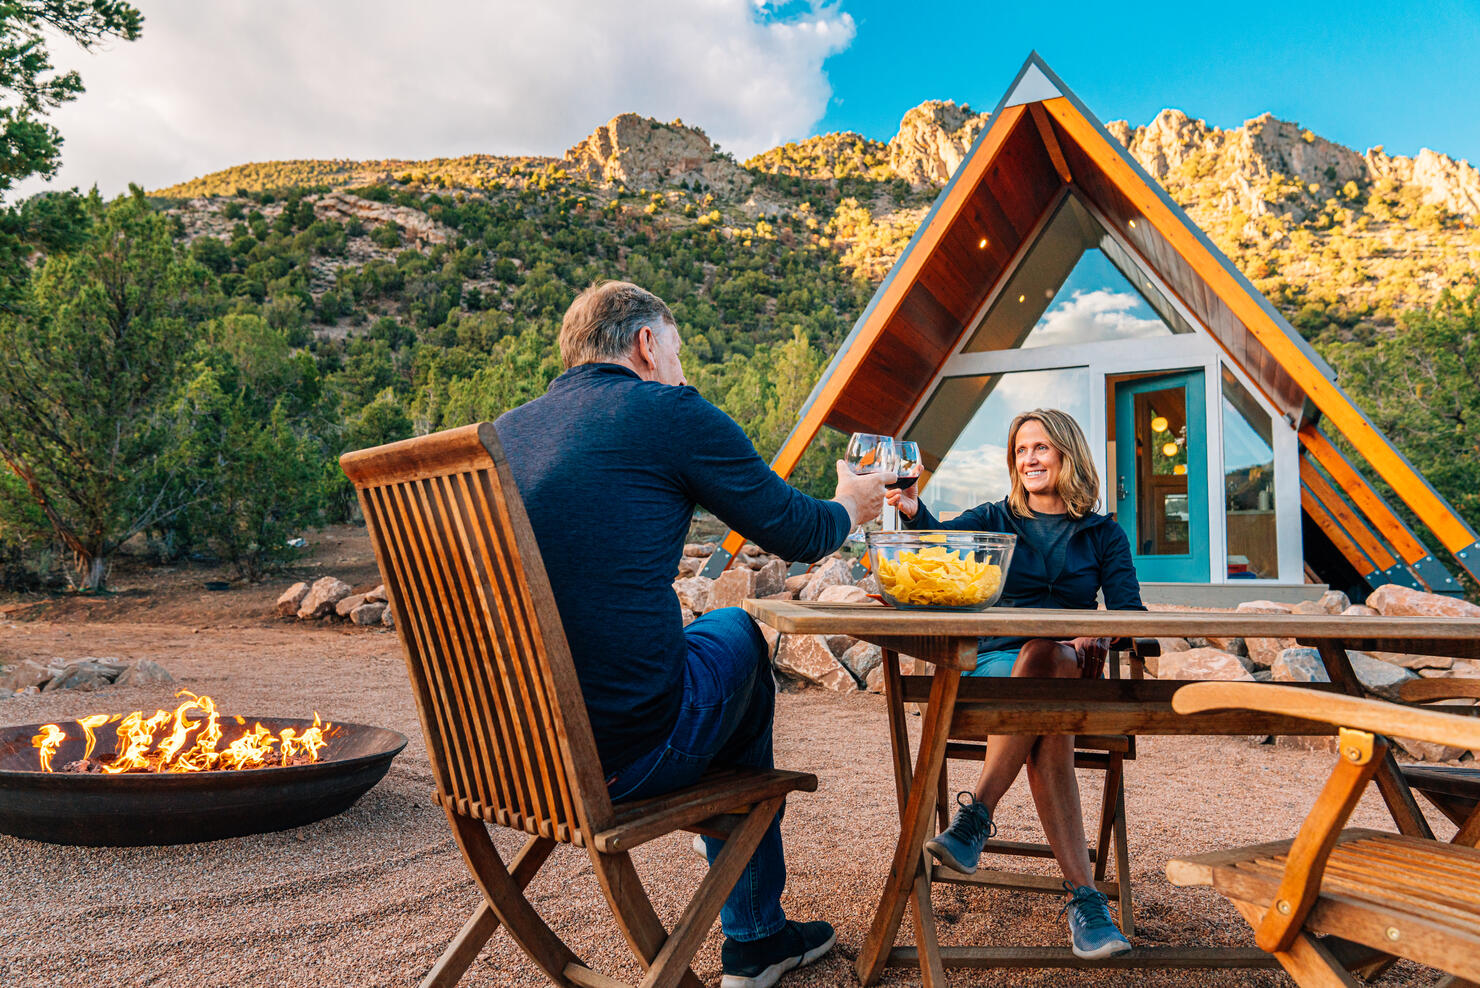 "Cheers!" Caucasian Couple Sharing a Celebratory Toast with Local Wine, Chips, and Salsa Together in a Xeriscaped Yard with a Cute Modern Xeriscaped Tiny Home in the Background